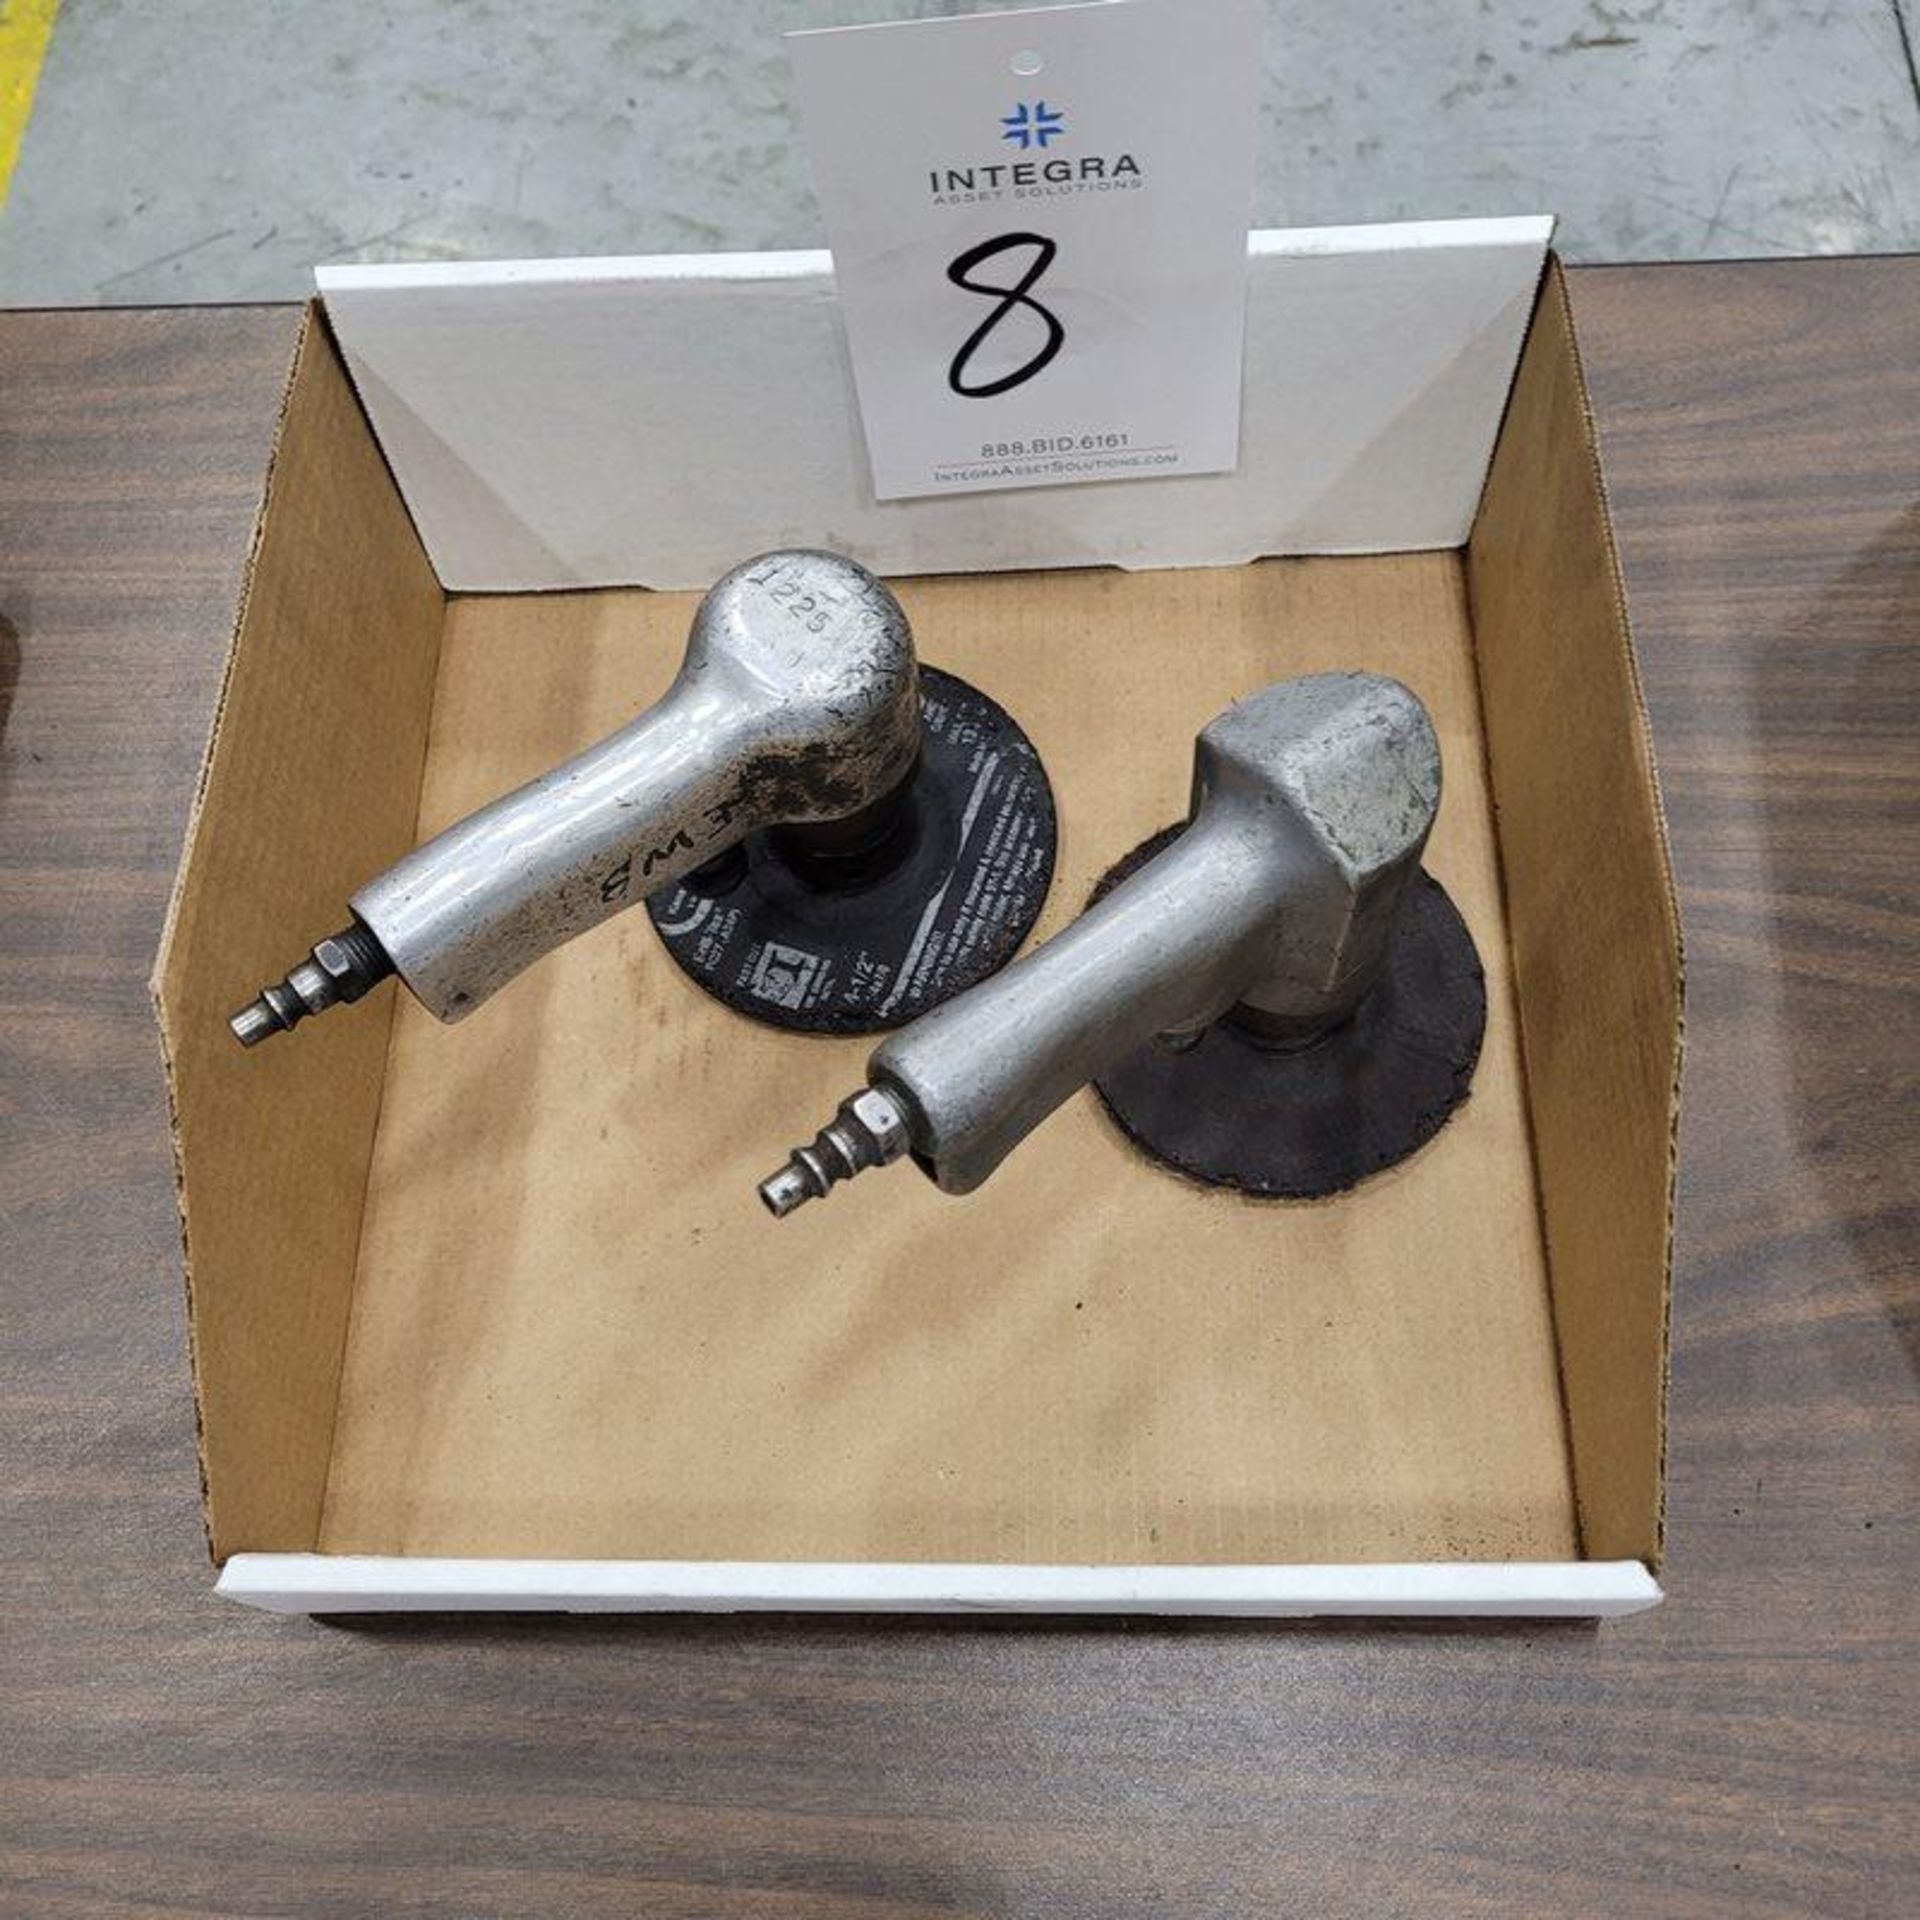 (2) Pneumatic 4" Angle Grinders